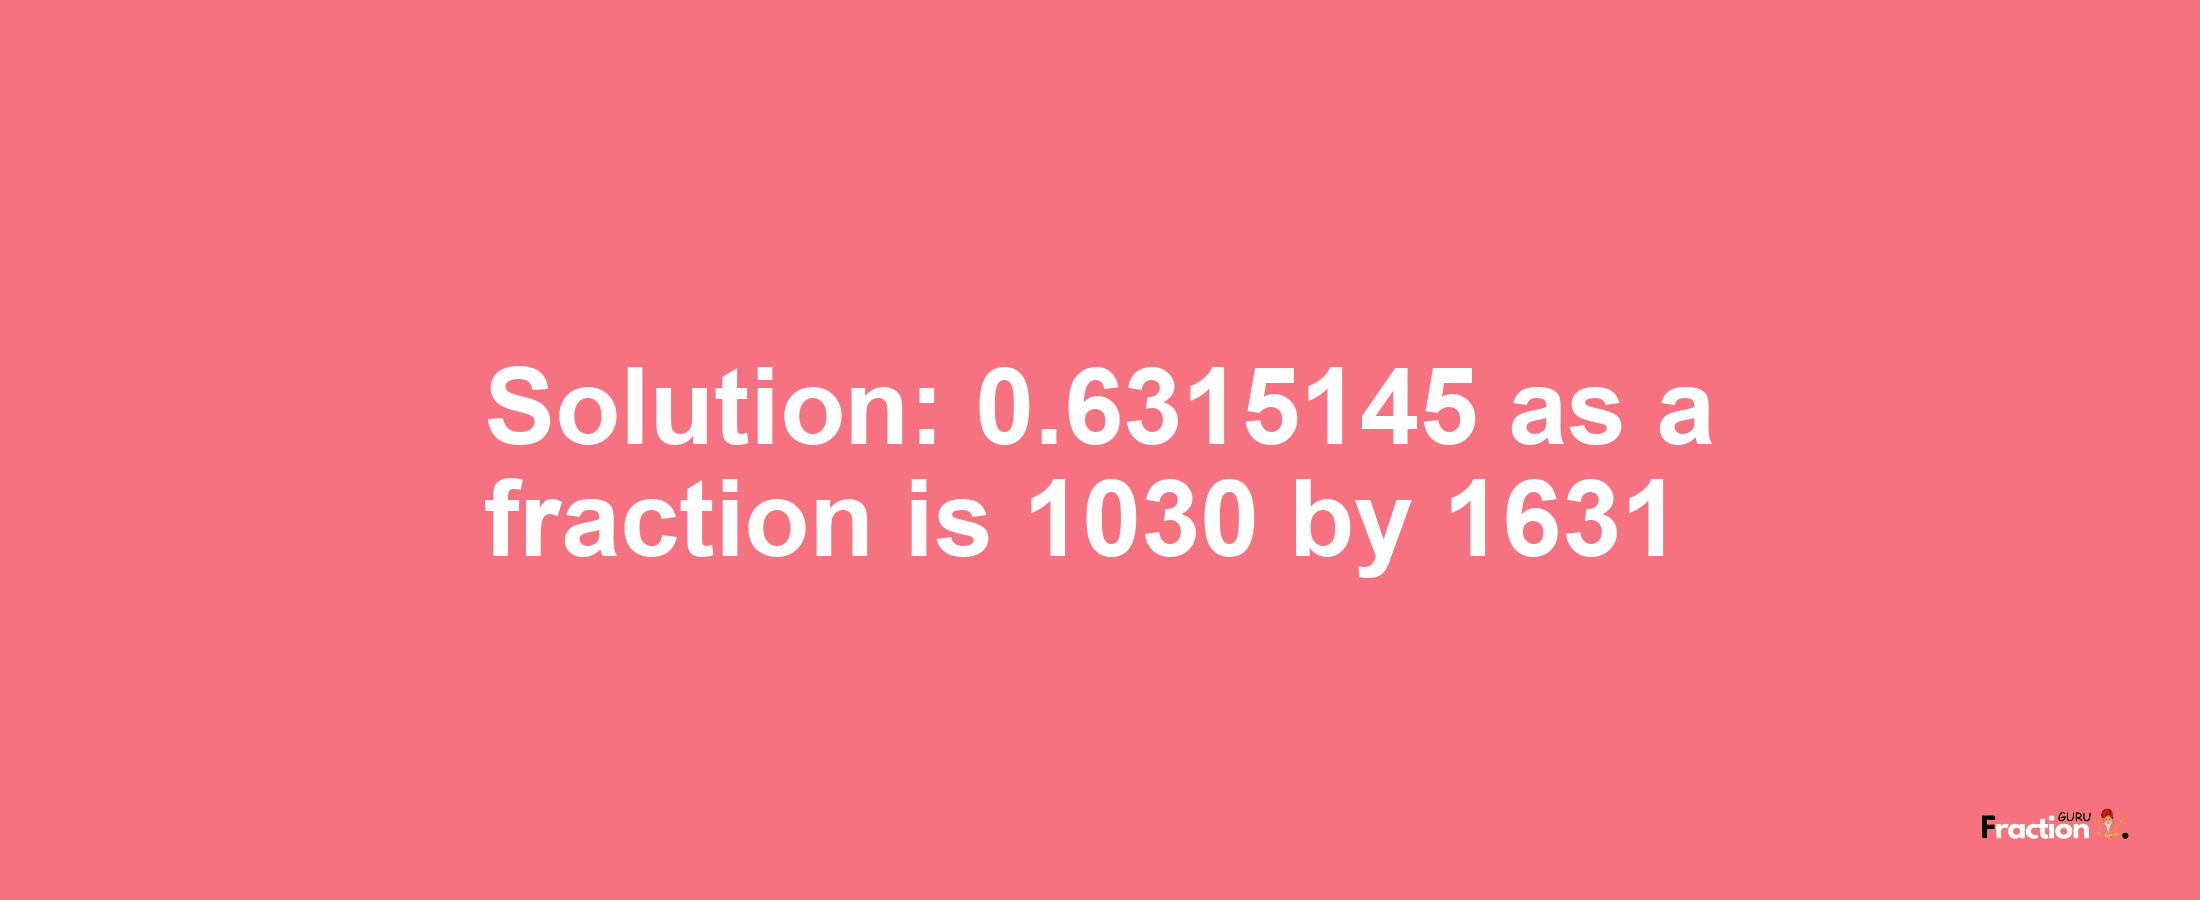 Solution:0.6315145 as a fraction is 1030/1631